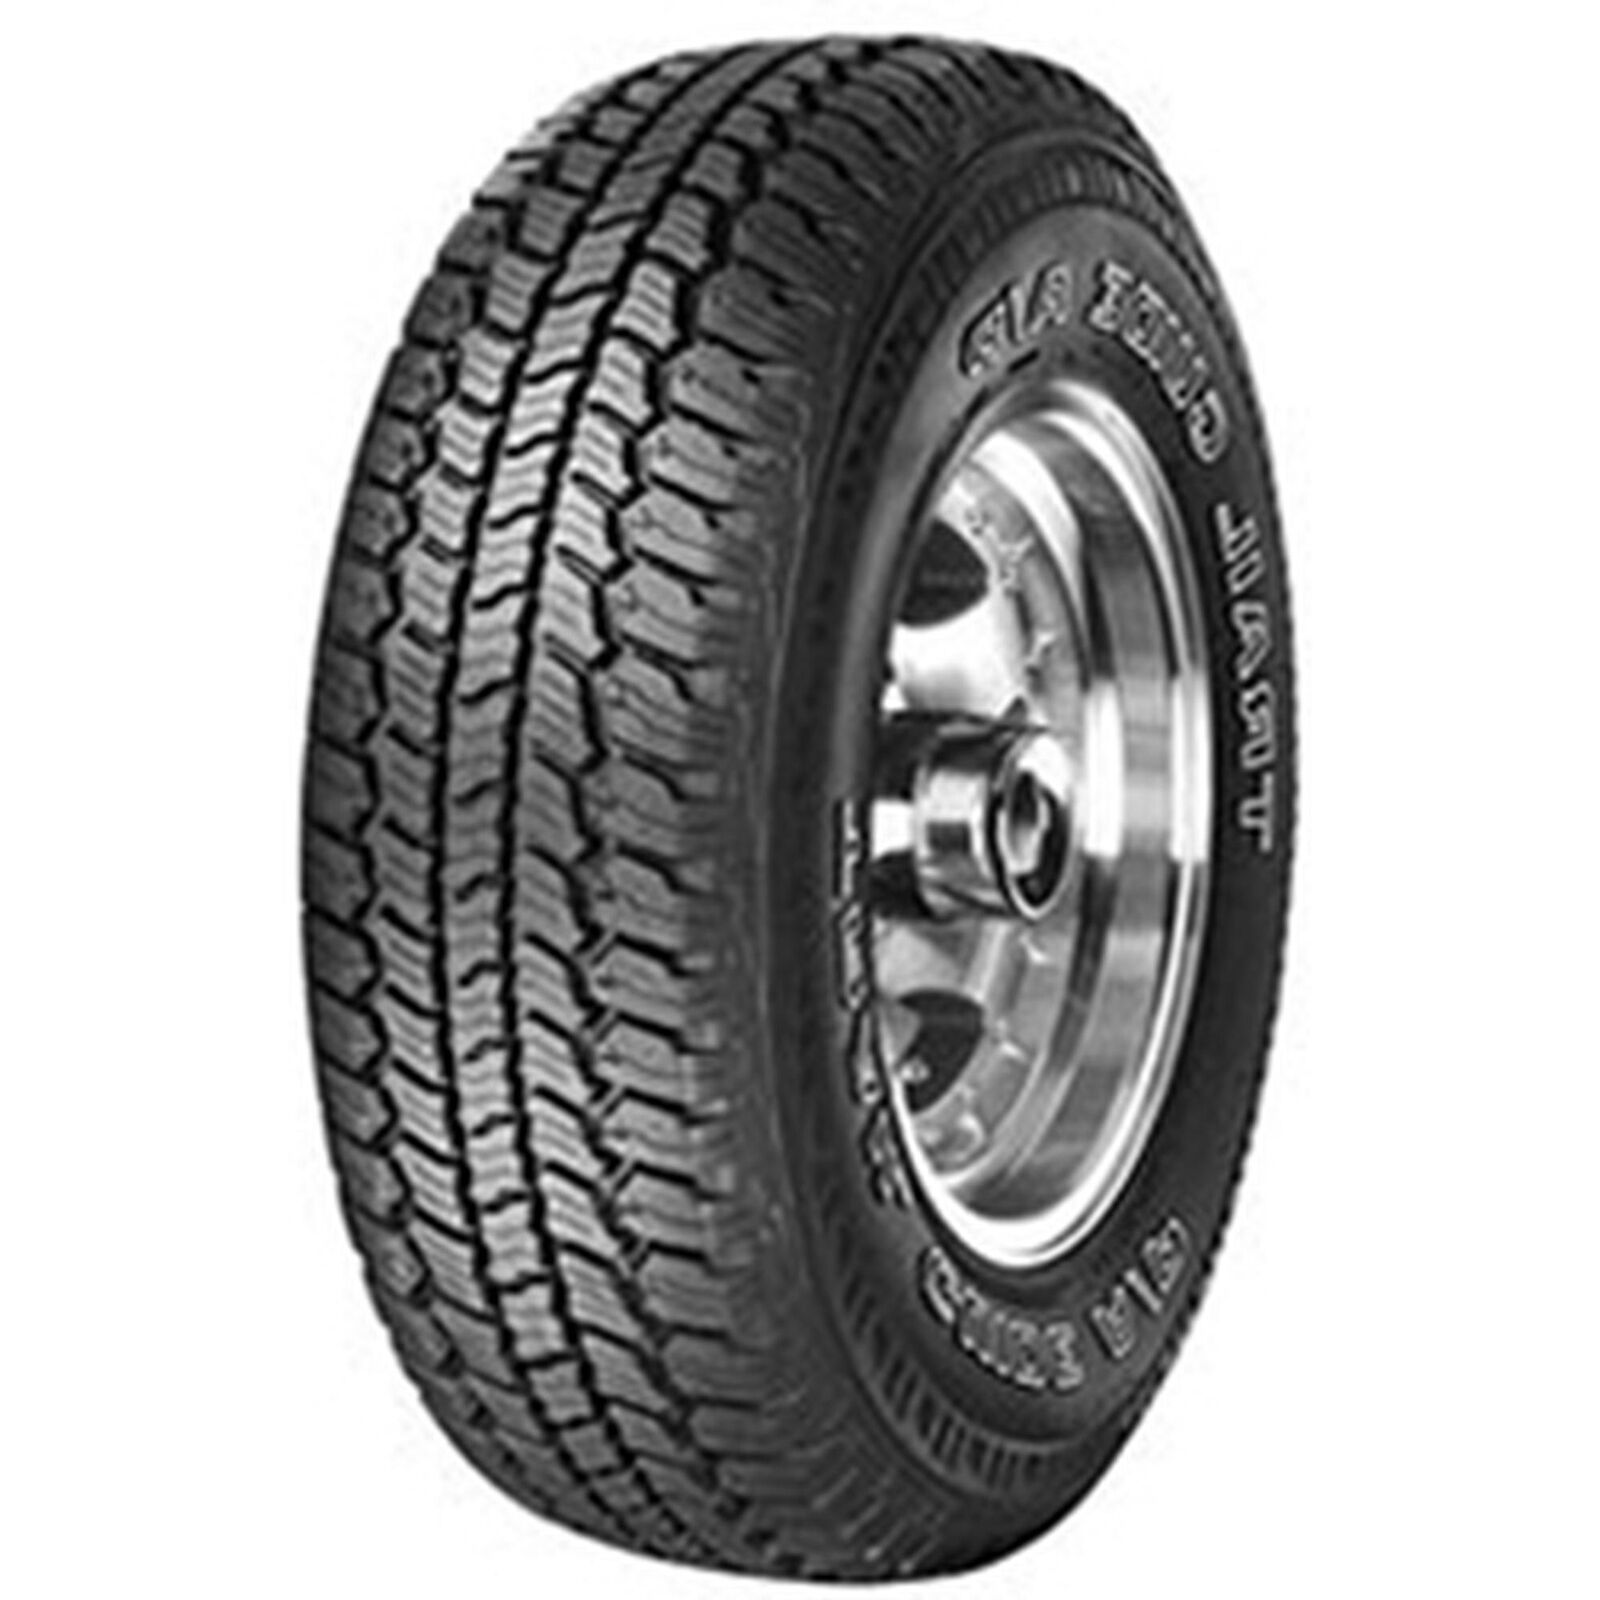 2 New Sigma Trail Guide A/t  - Lt275x65r20 Tires 2756520 275 65 20